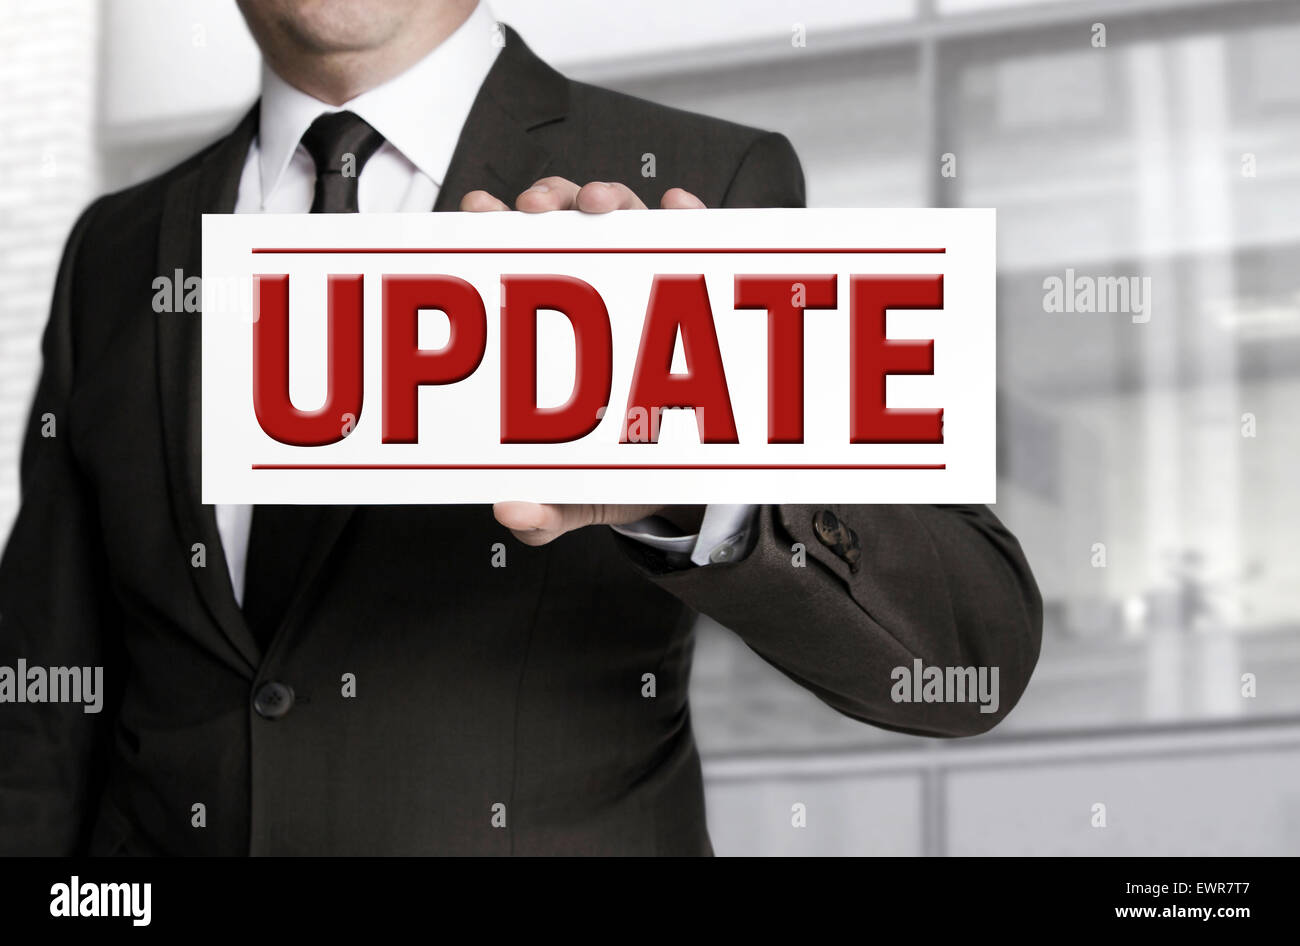 Update sign is held by businessman. Stock Photo